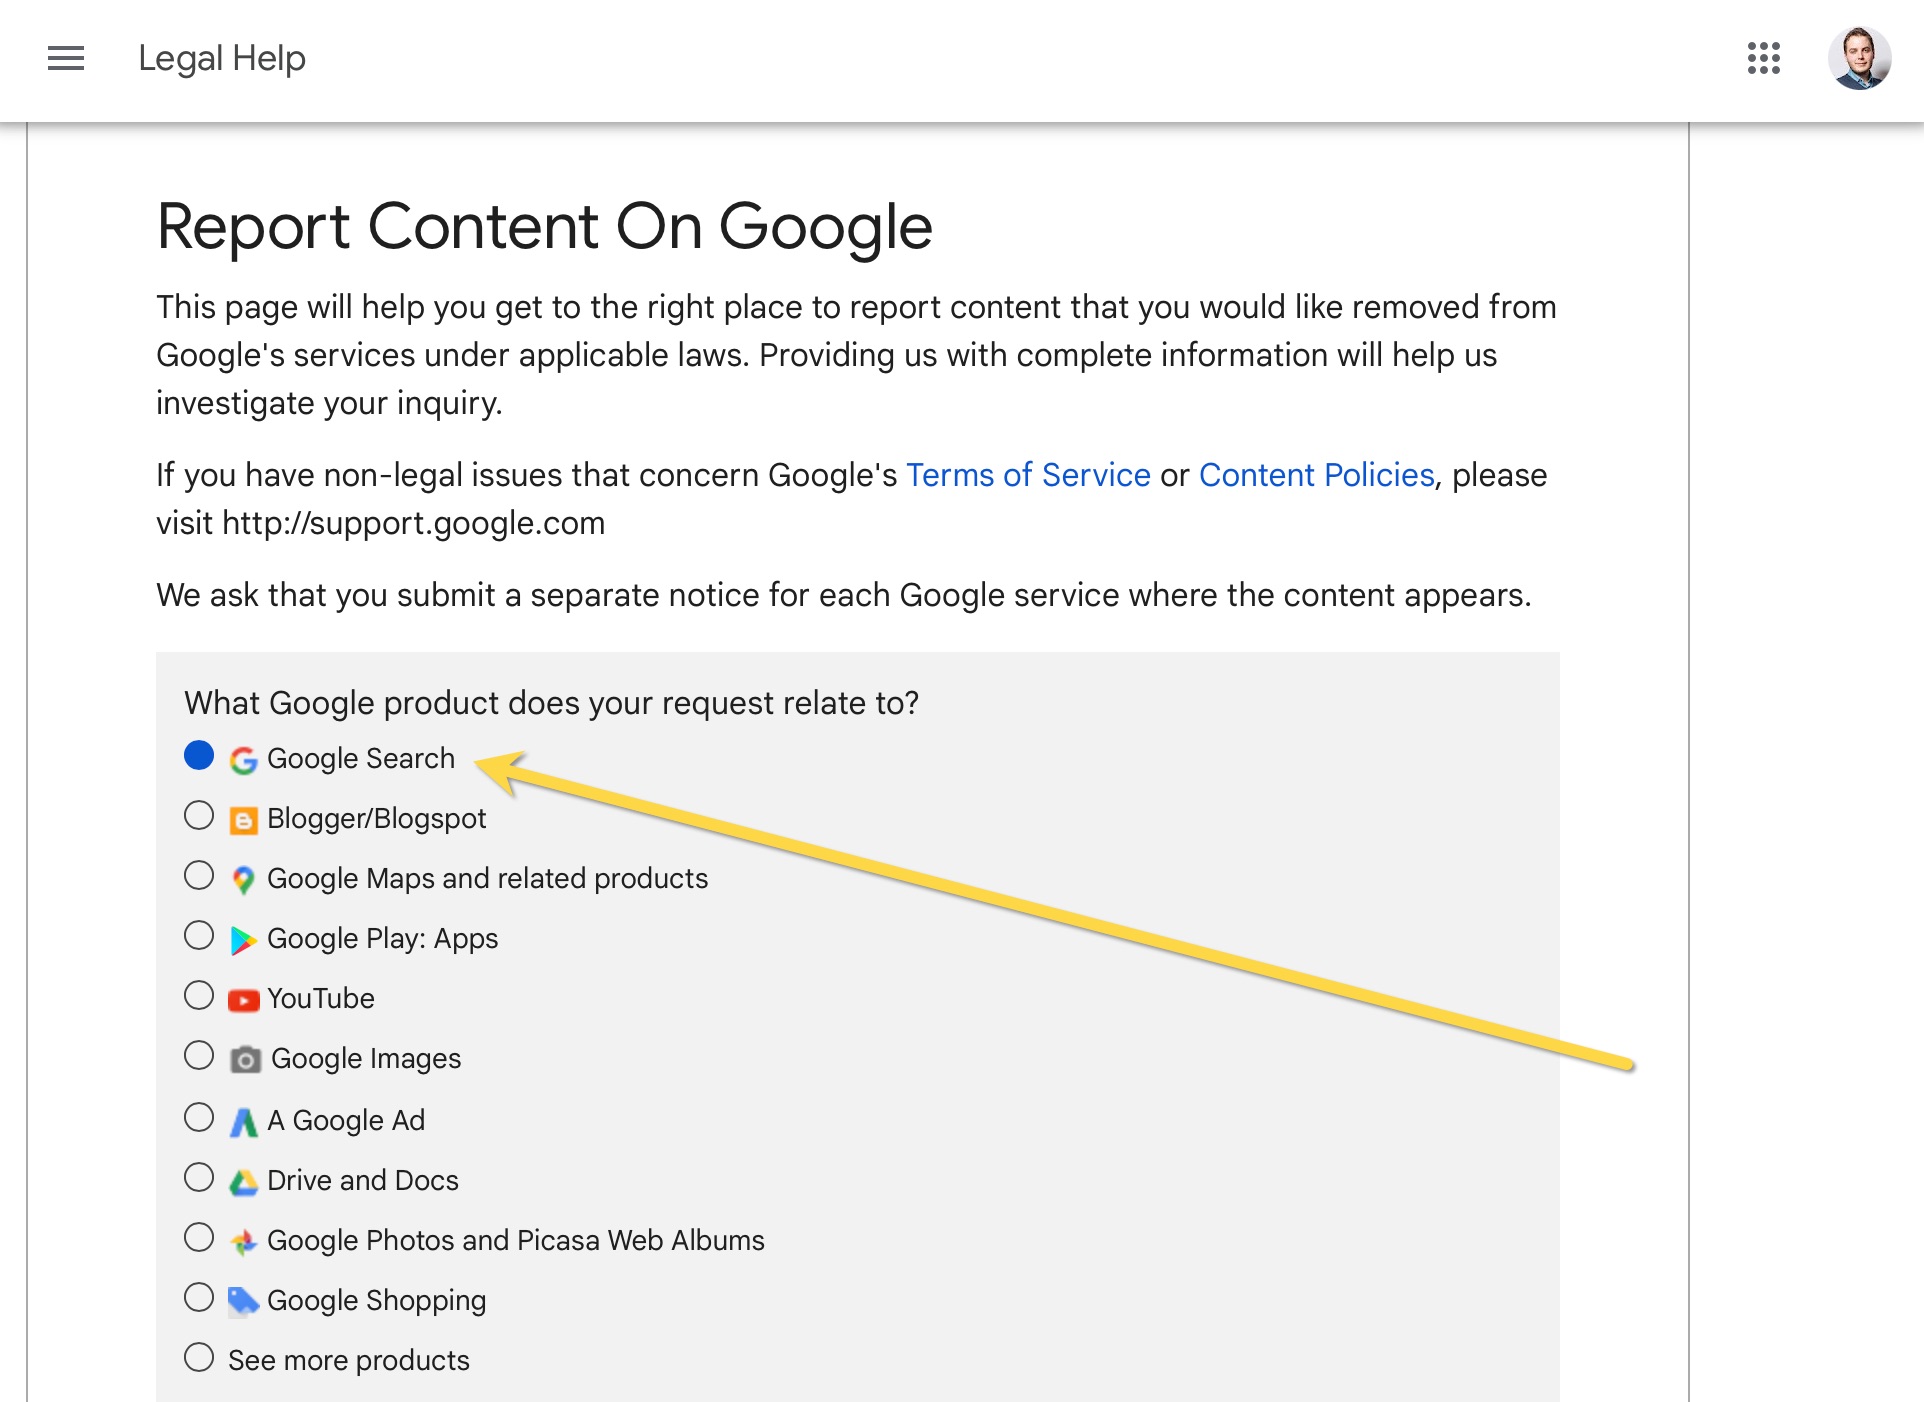 select related google product to report content